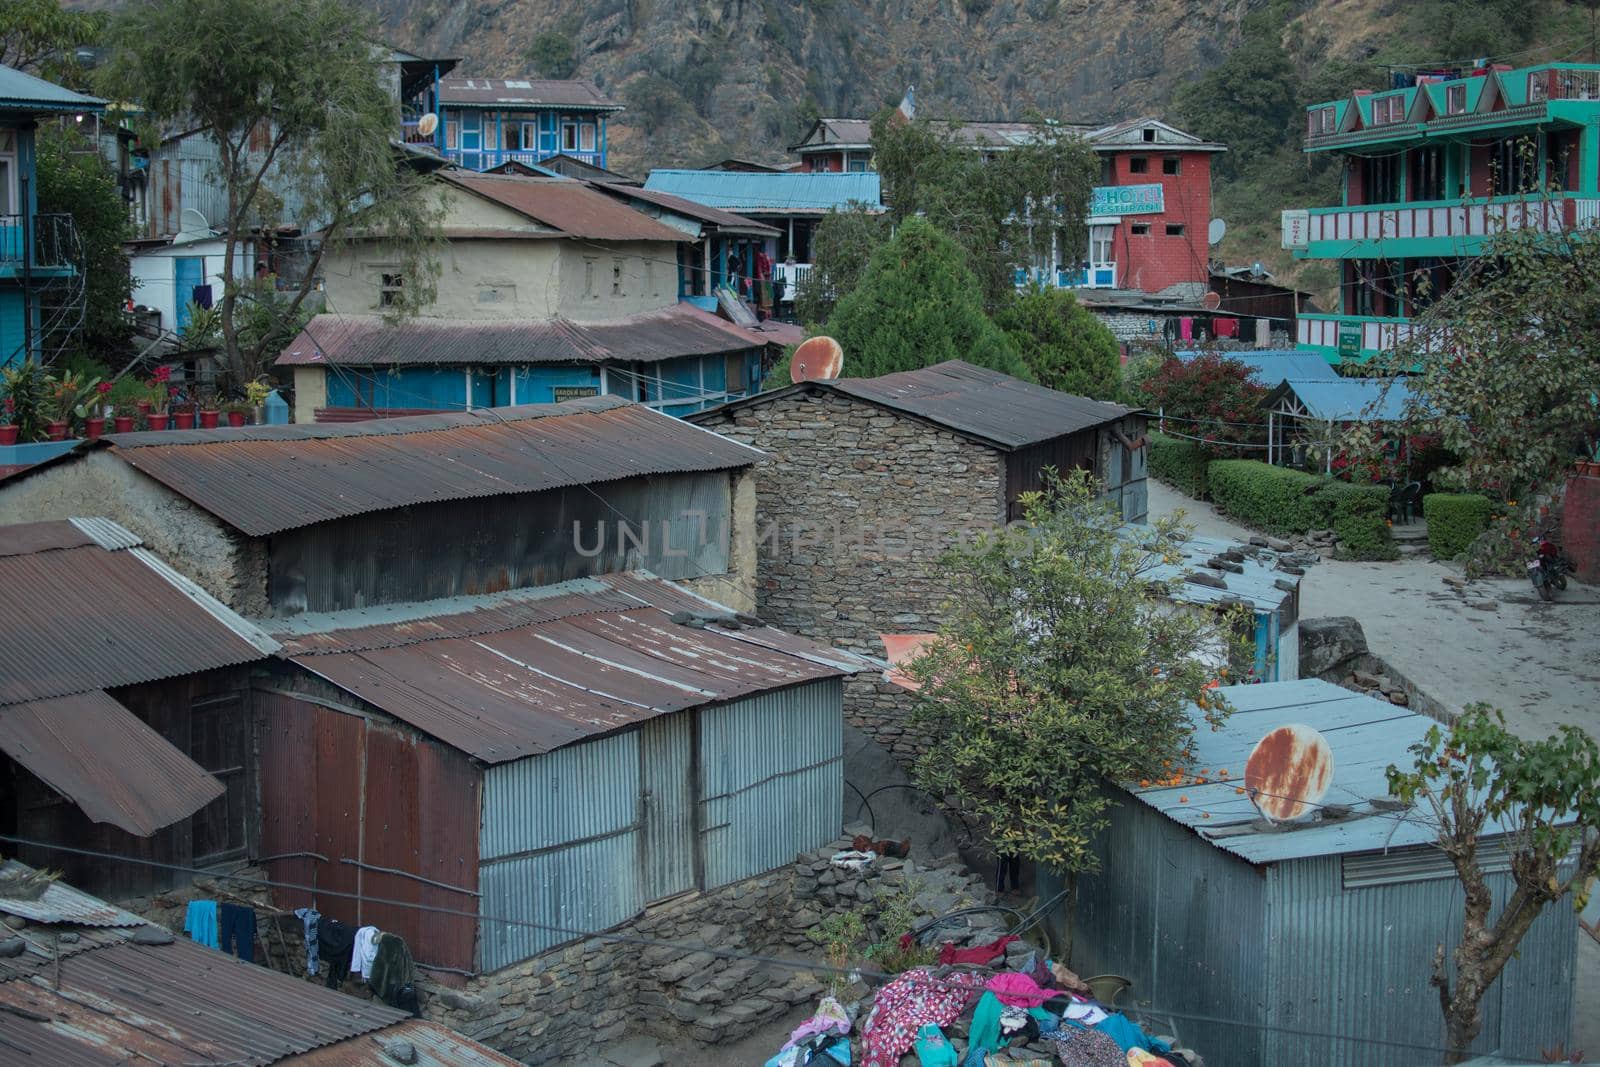 Colorful Jagat mountain village in Marshyangdi river valley, Annapurna circuit, Nepal